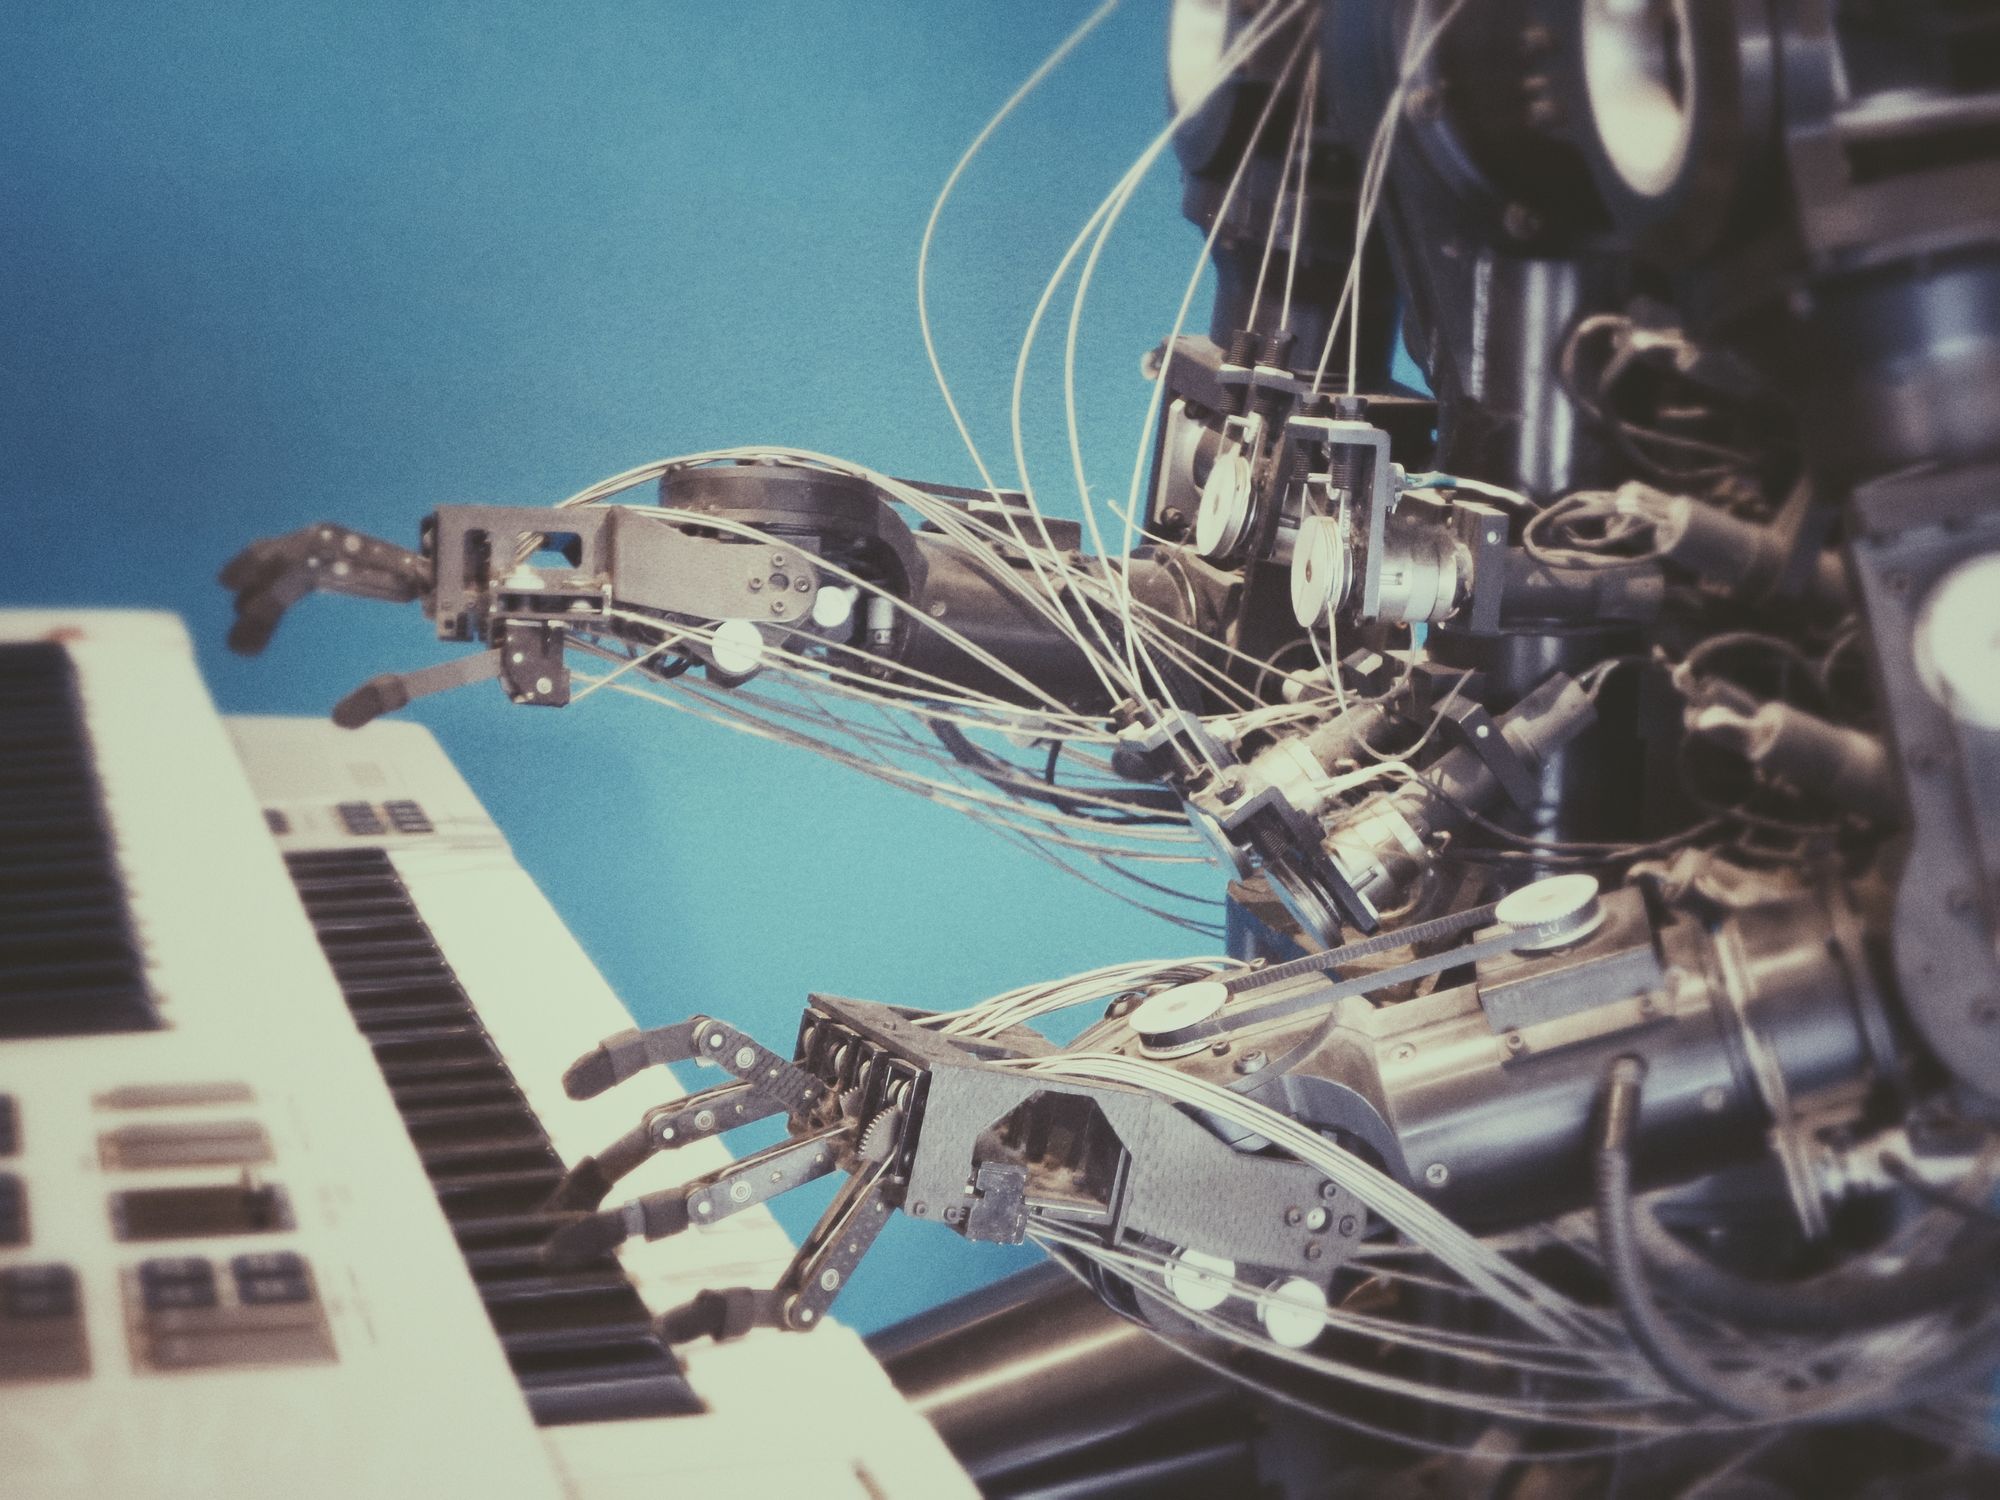 Exploration Weekly - Copyright Alliance backs the record industry against Yout / Italian Songwriters' music back on Facebook and Instagram / US Congress focuses on copyright concerns of generative AI